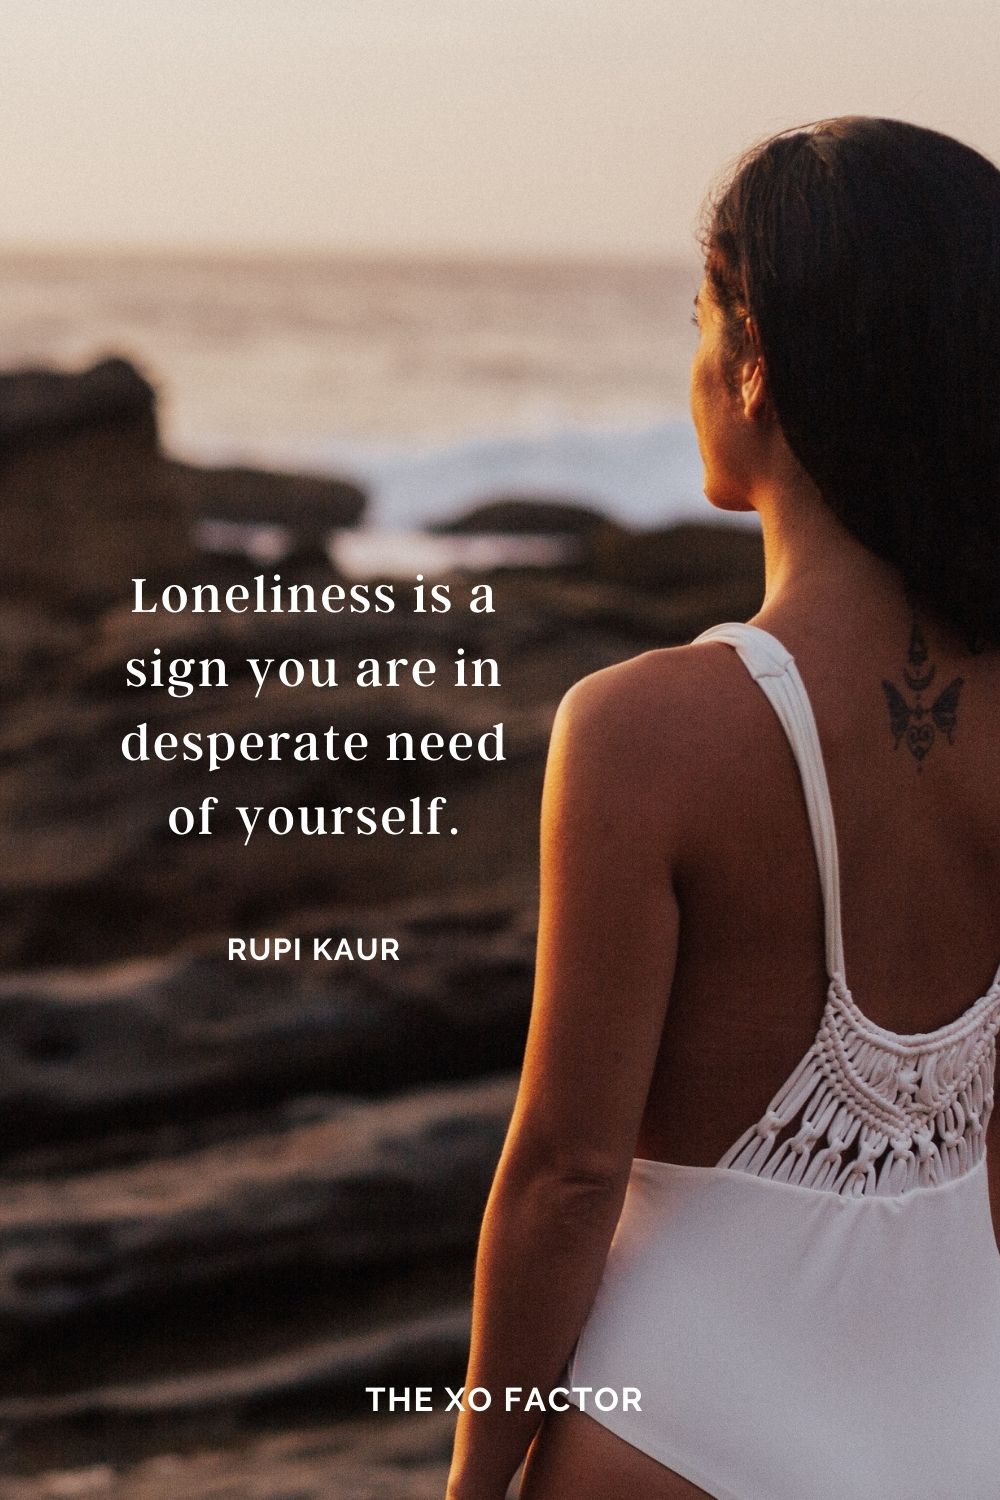 Loneliness is a sign you are in desperate need of yourself. Rupi Kaur